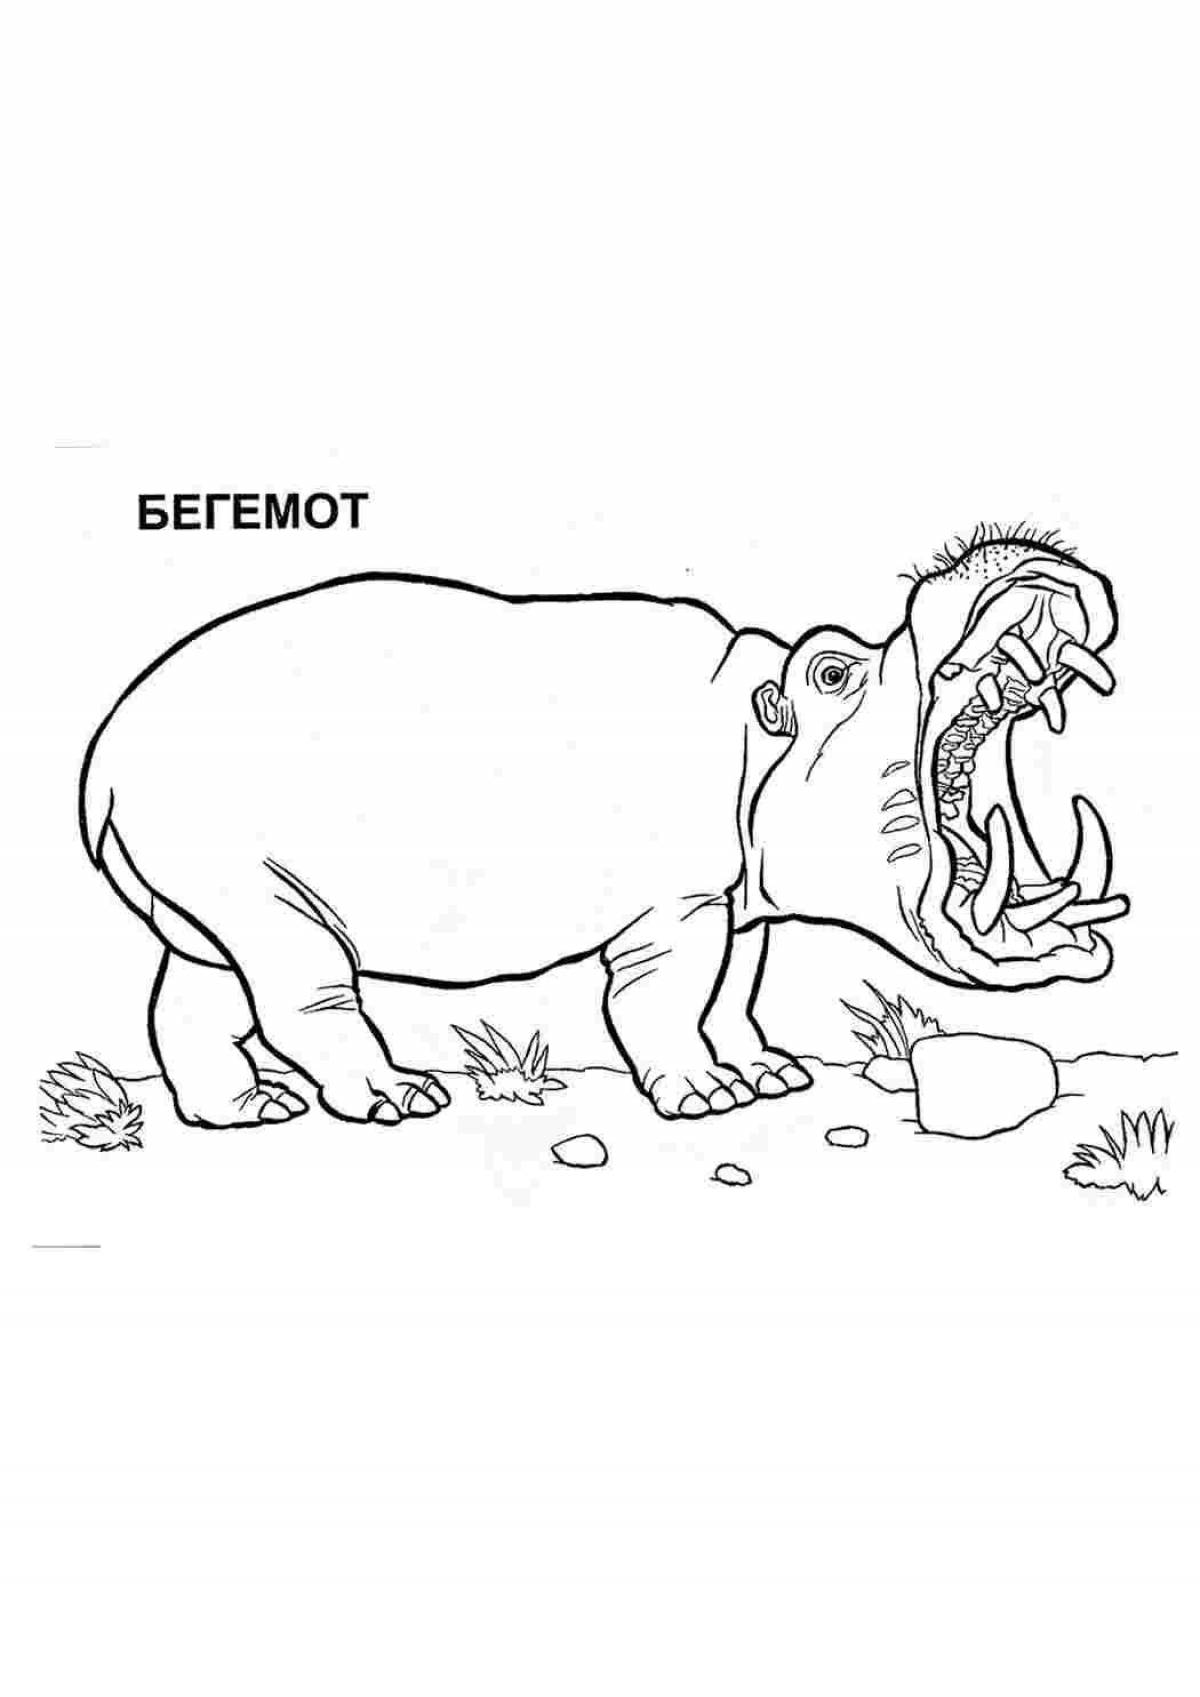 Hippo coloring page for kids 3-4 years old